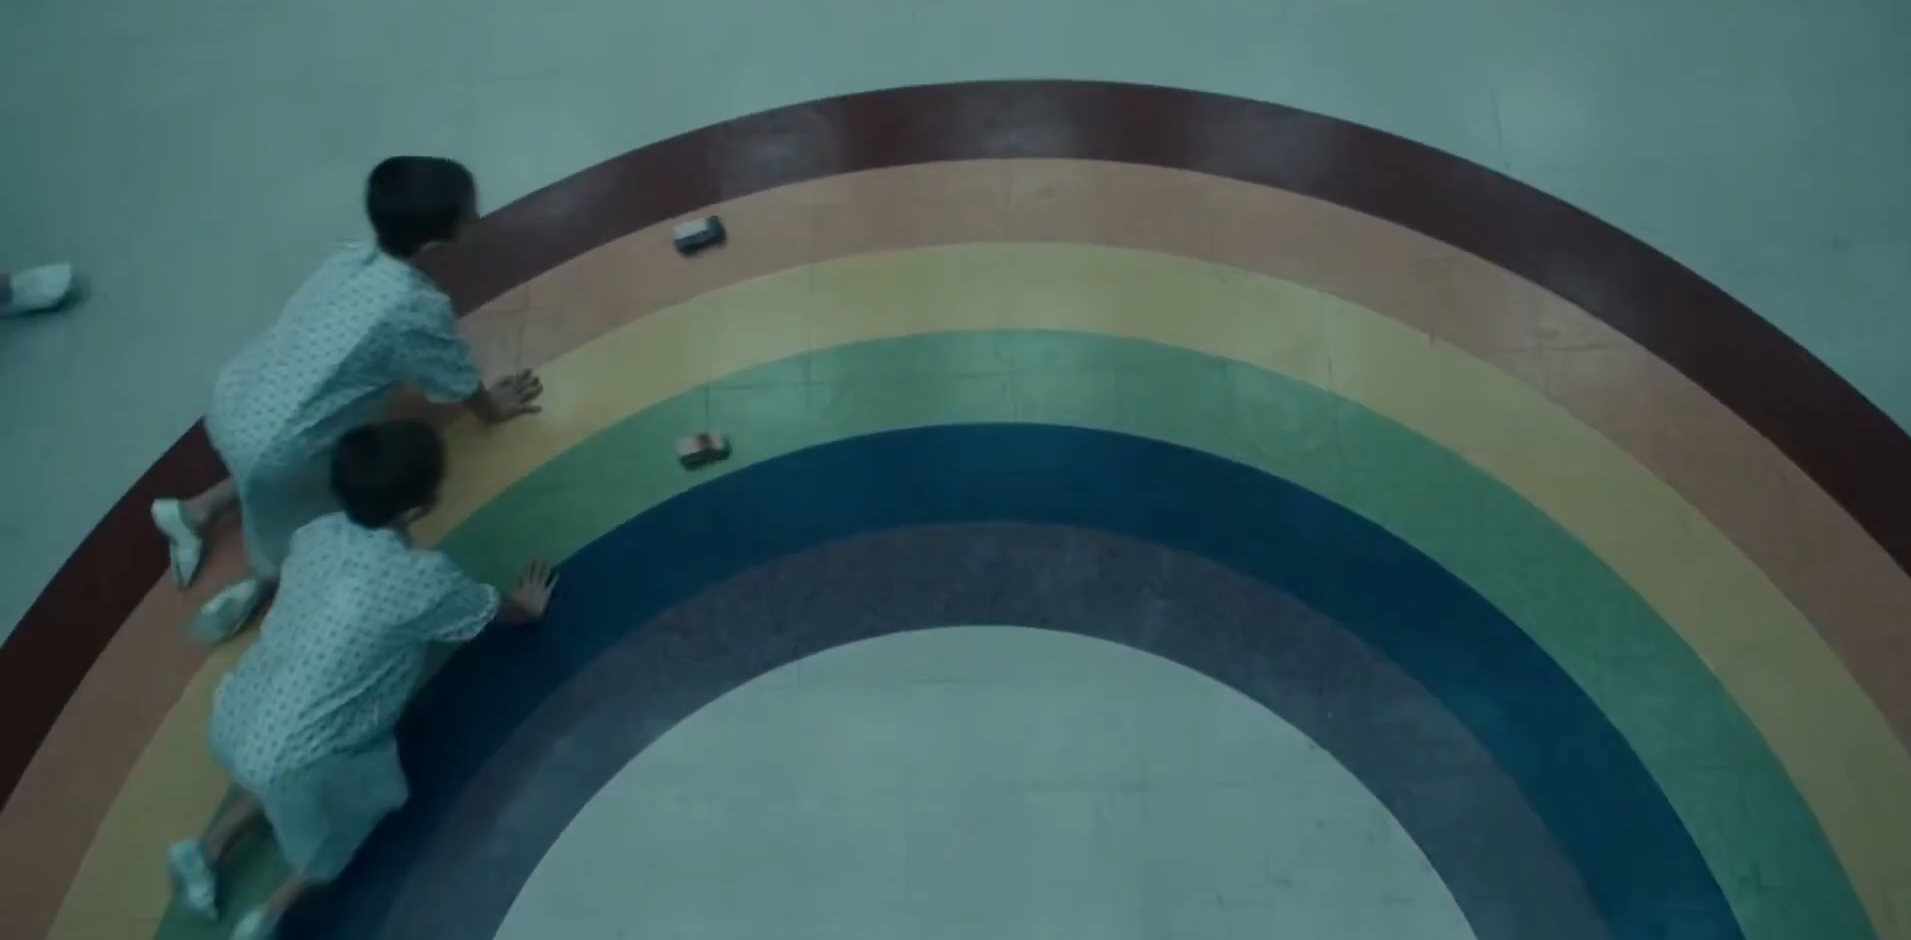 test subjects racing toy cars in a rainbow track